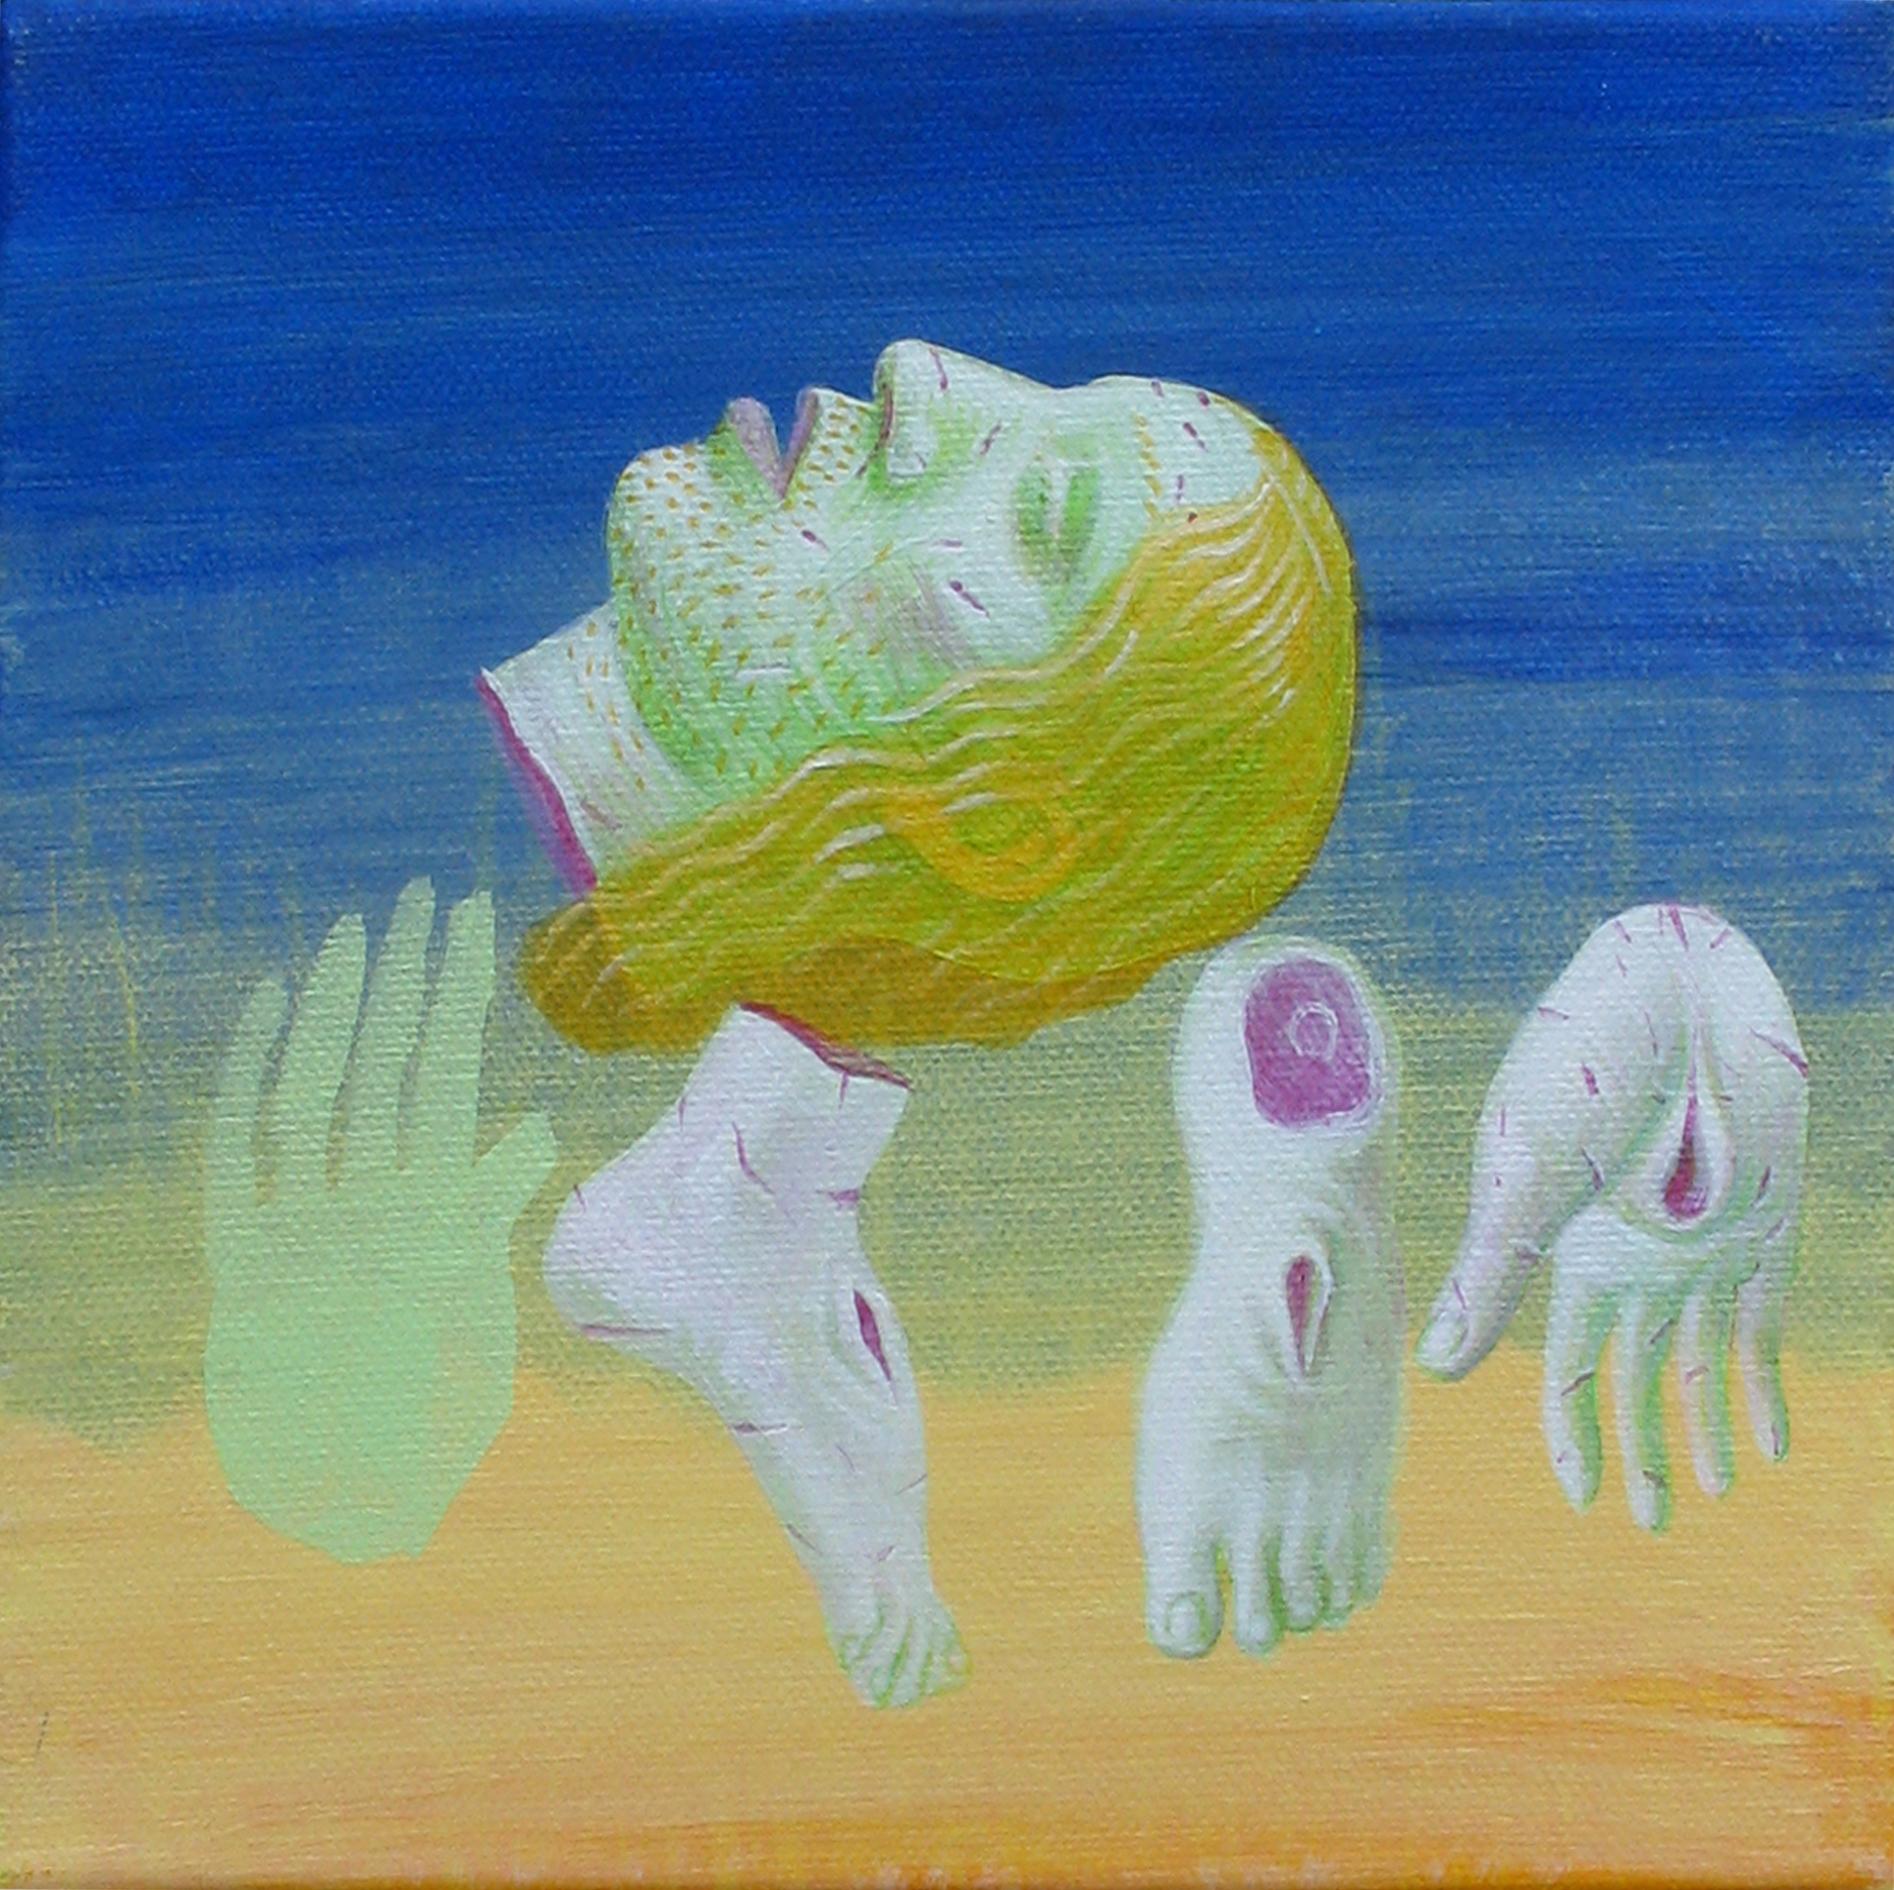 Small Christ 5 - Contemporary Art, Figurative, Painting, Divine, Blue, Green